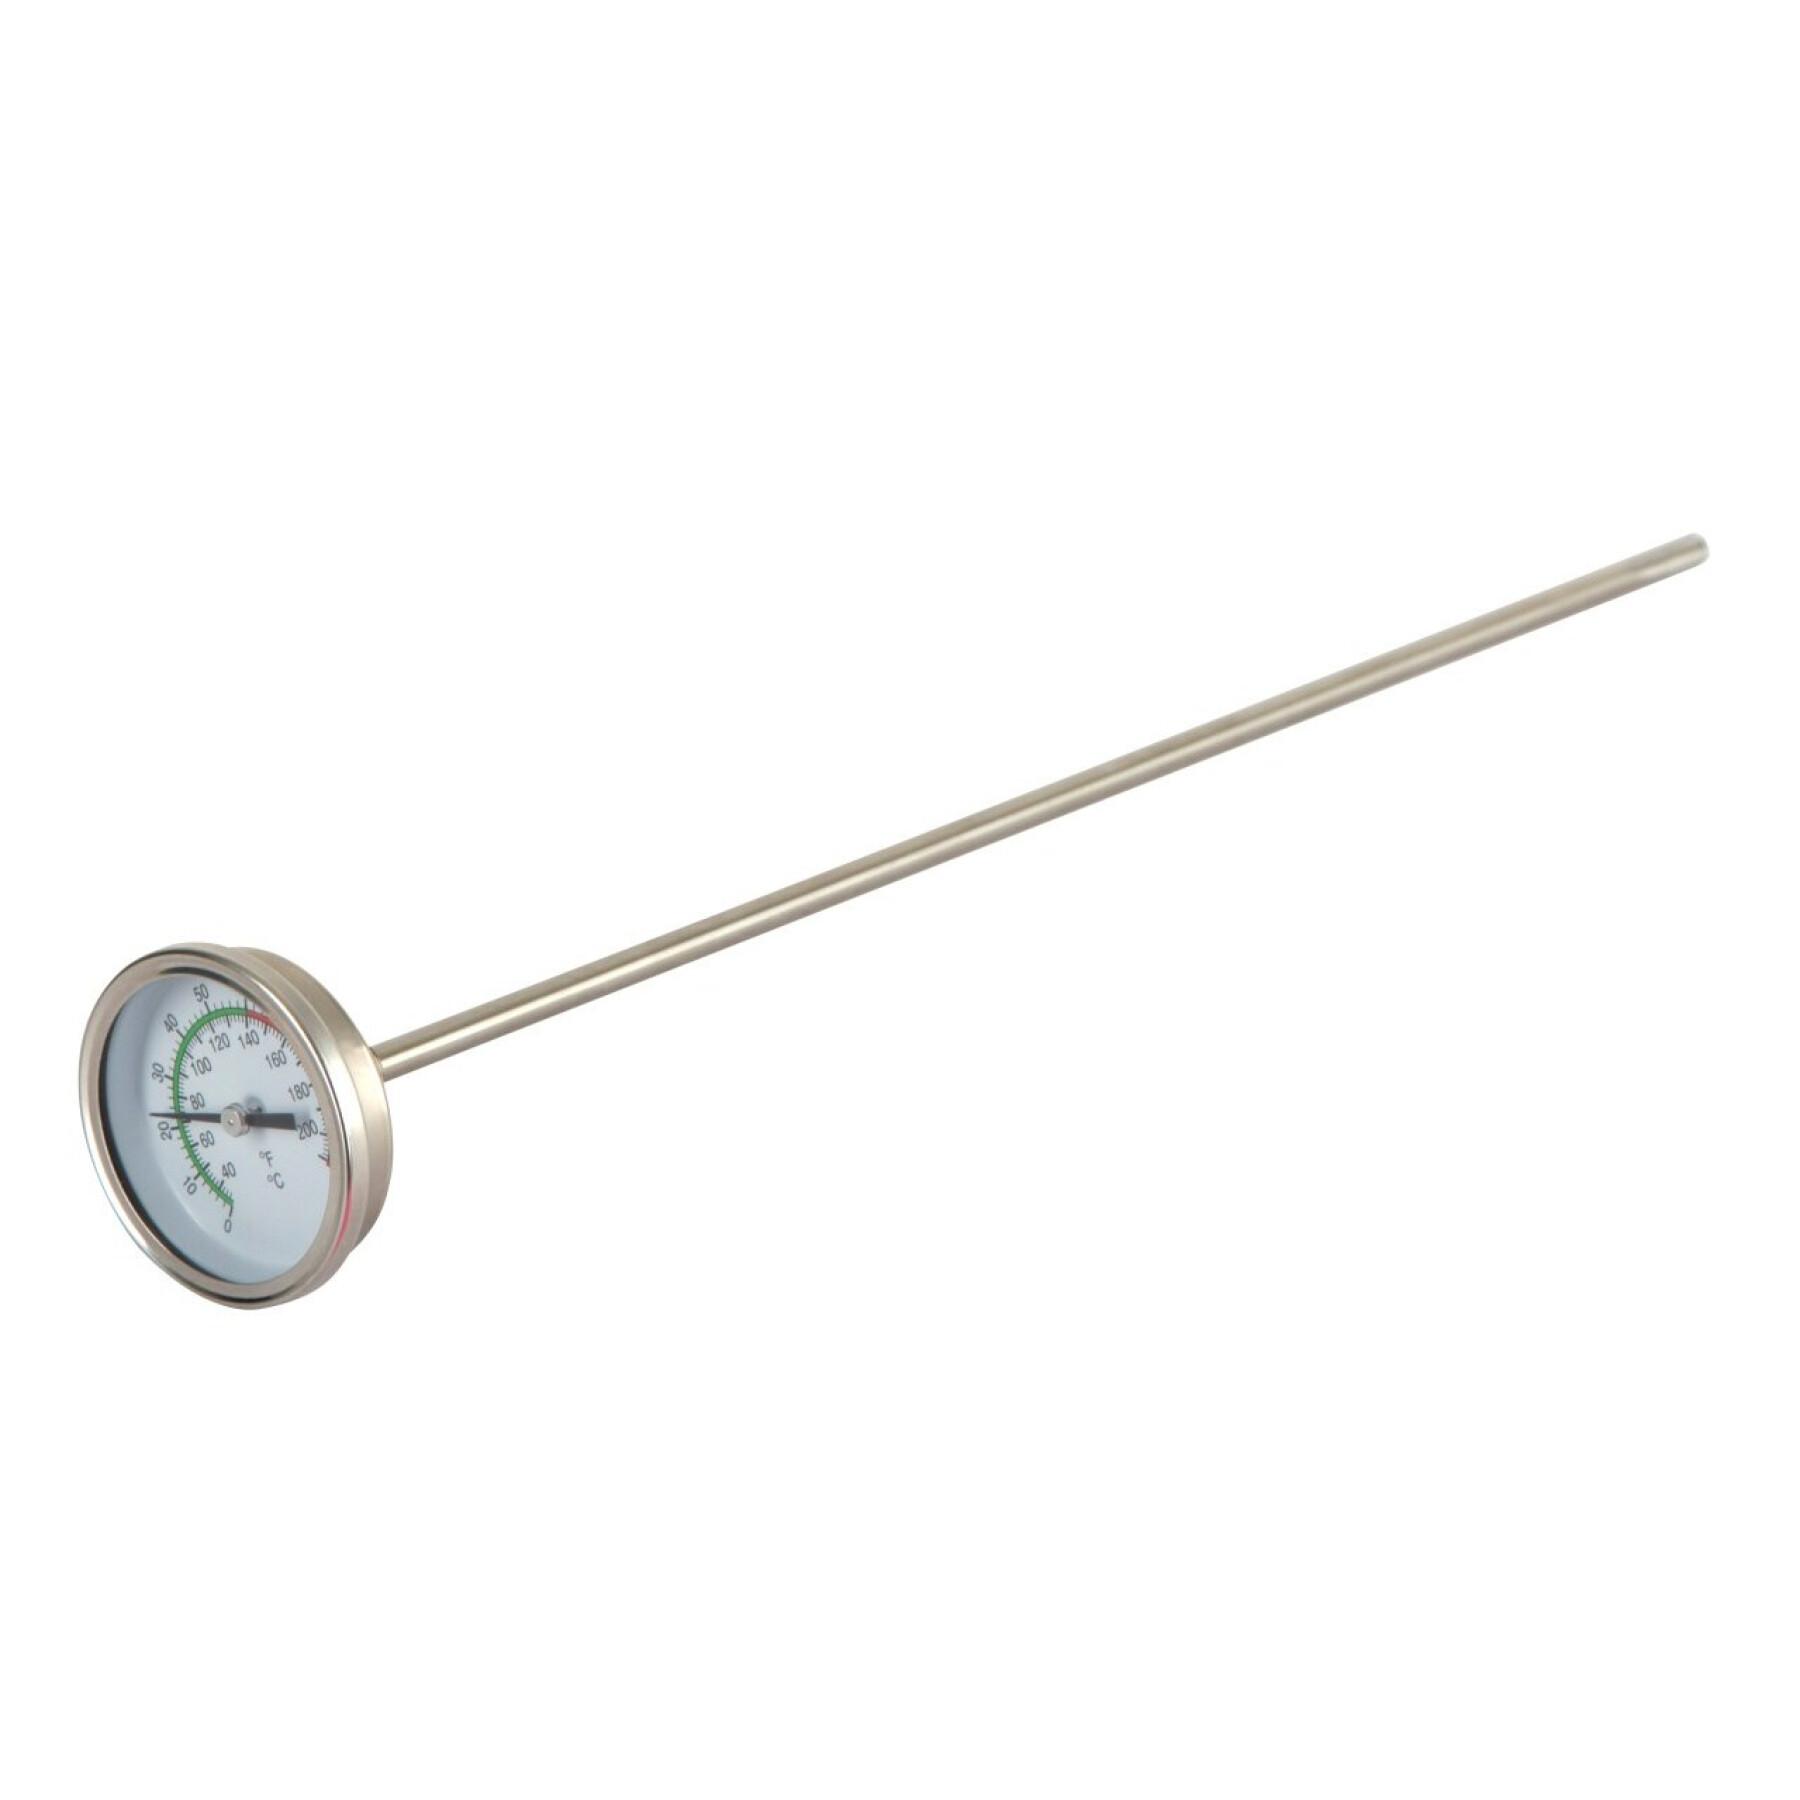 Stainless steel rod thermometer with probe Kerbl